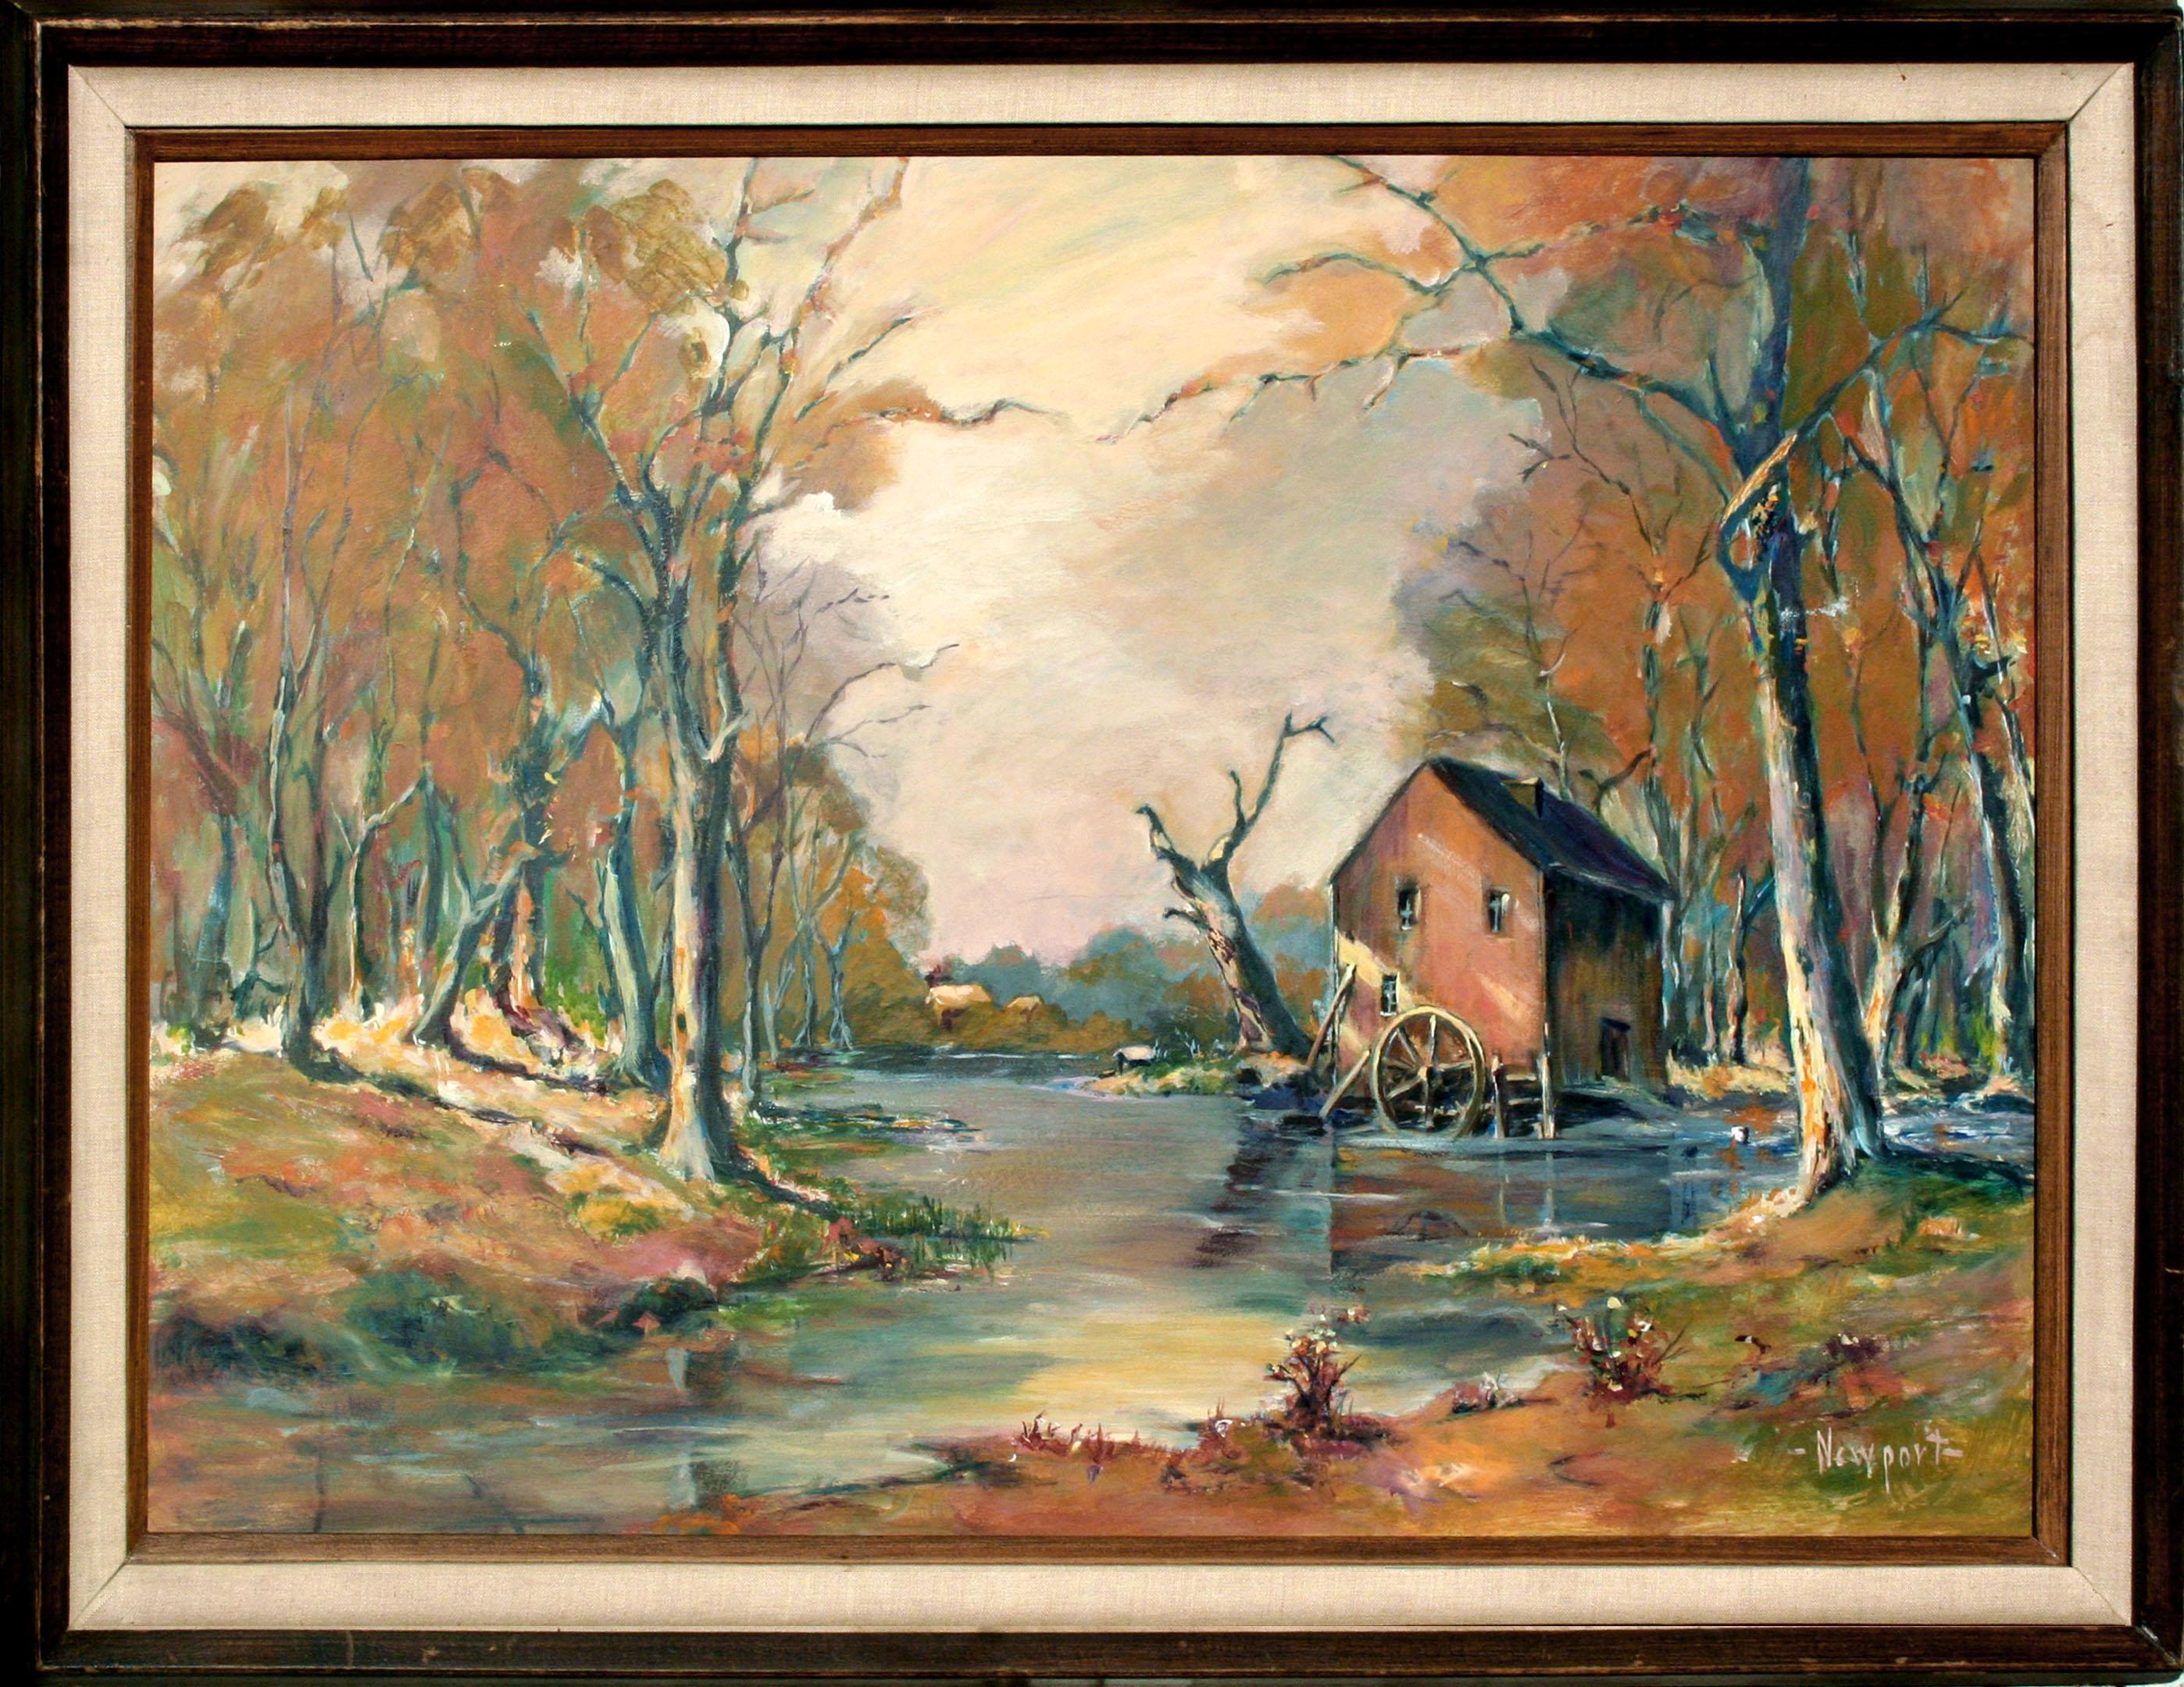 The Lake and Old Mill, Vintage Autumnal Landscape by Virginia Newport Ingram